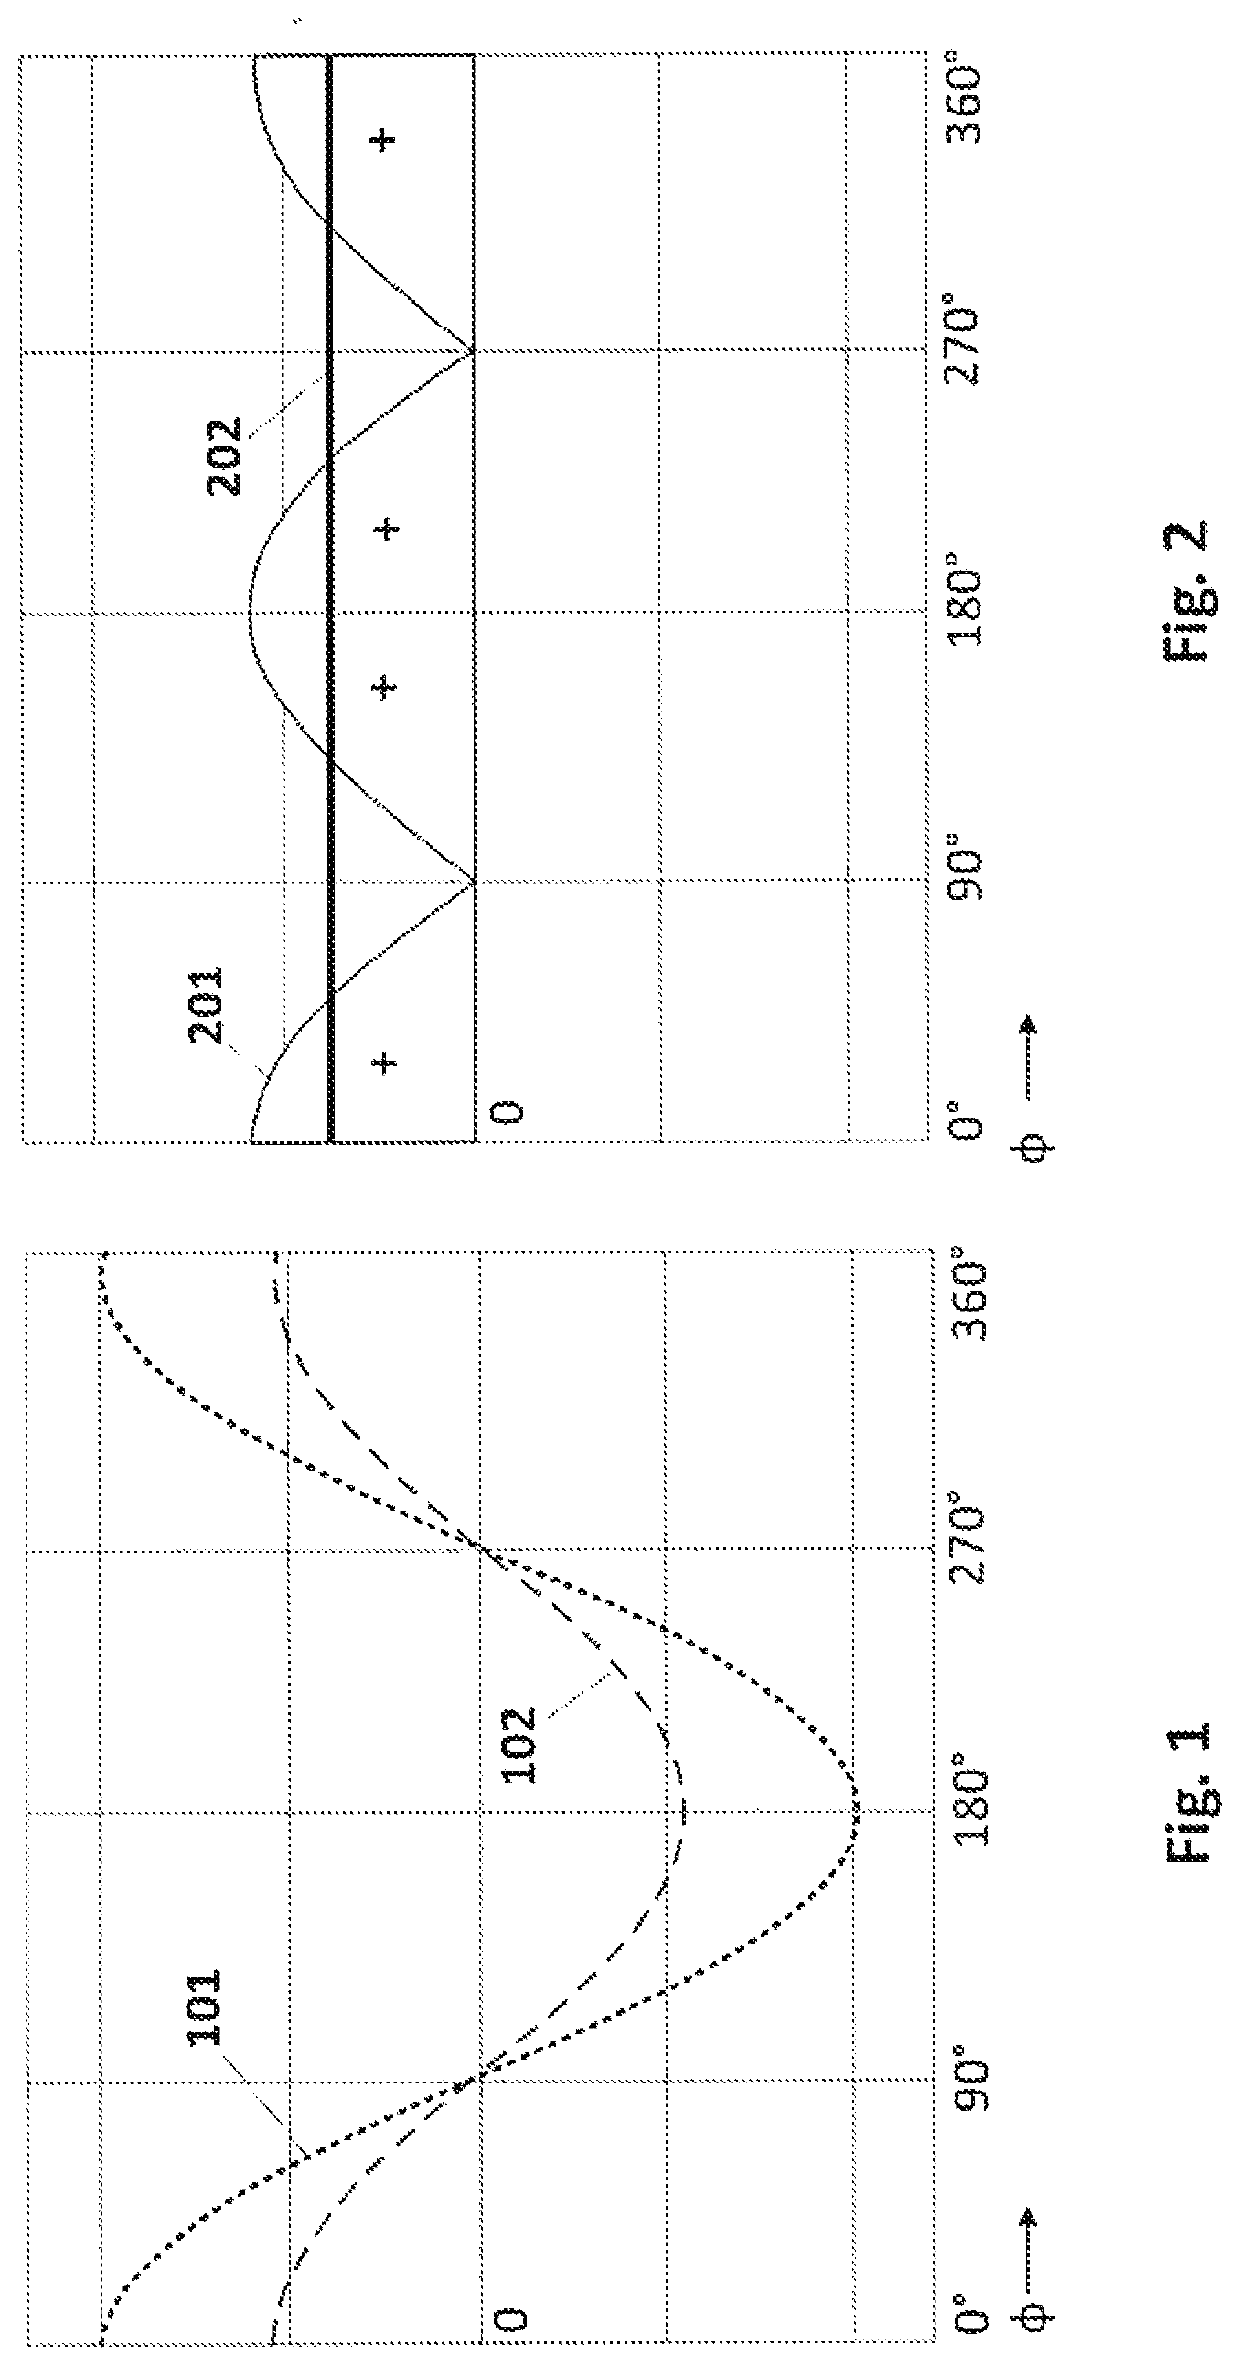 Device and process for detecting and mitigating reverse power-flow